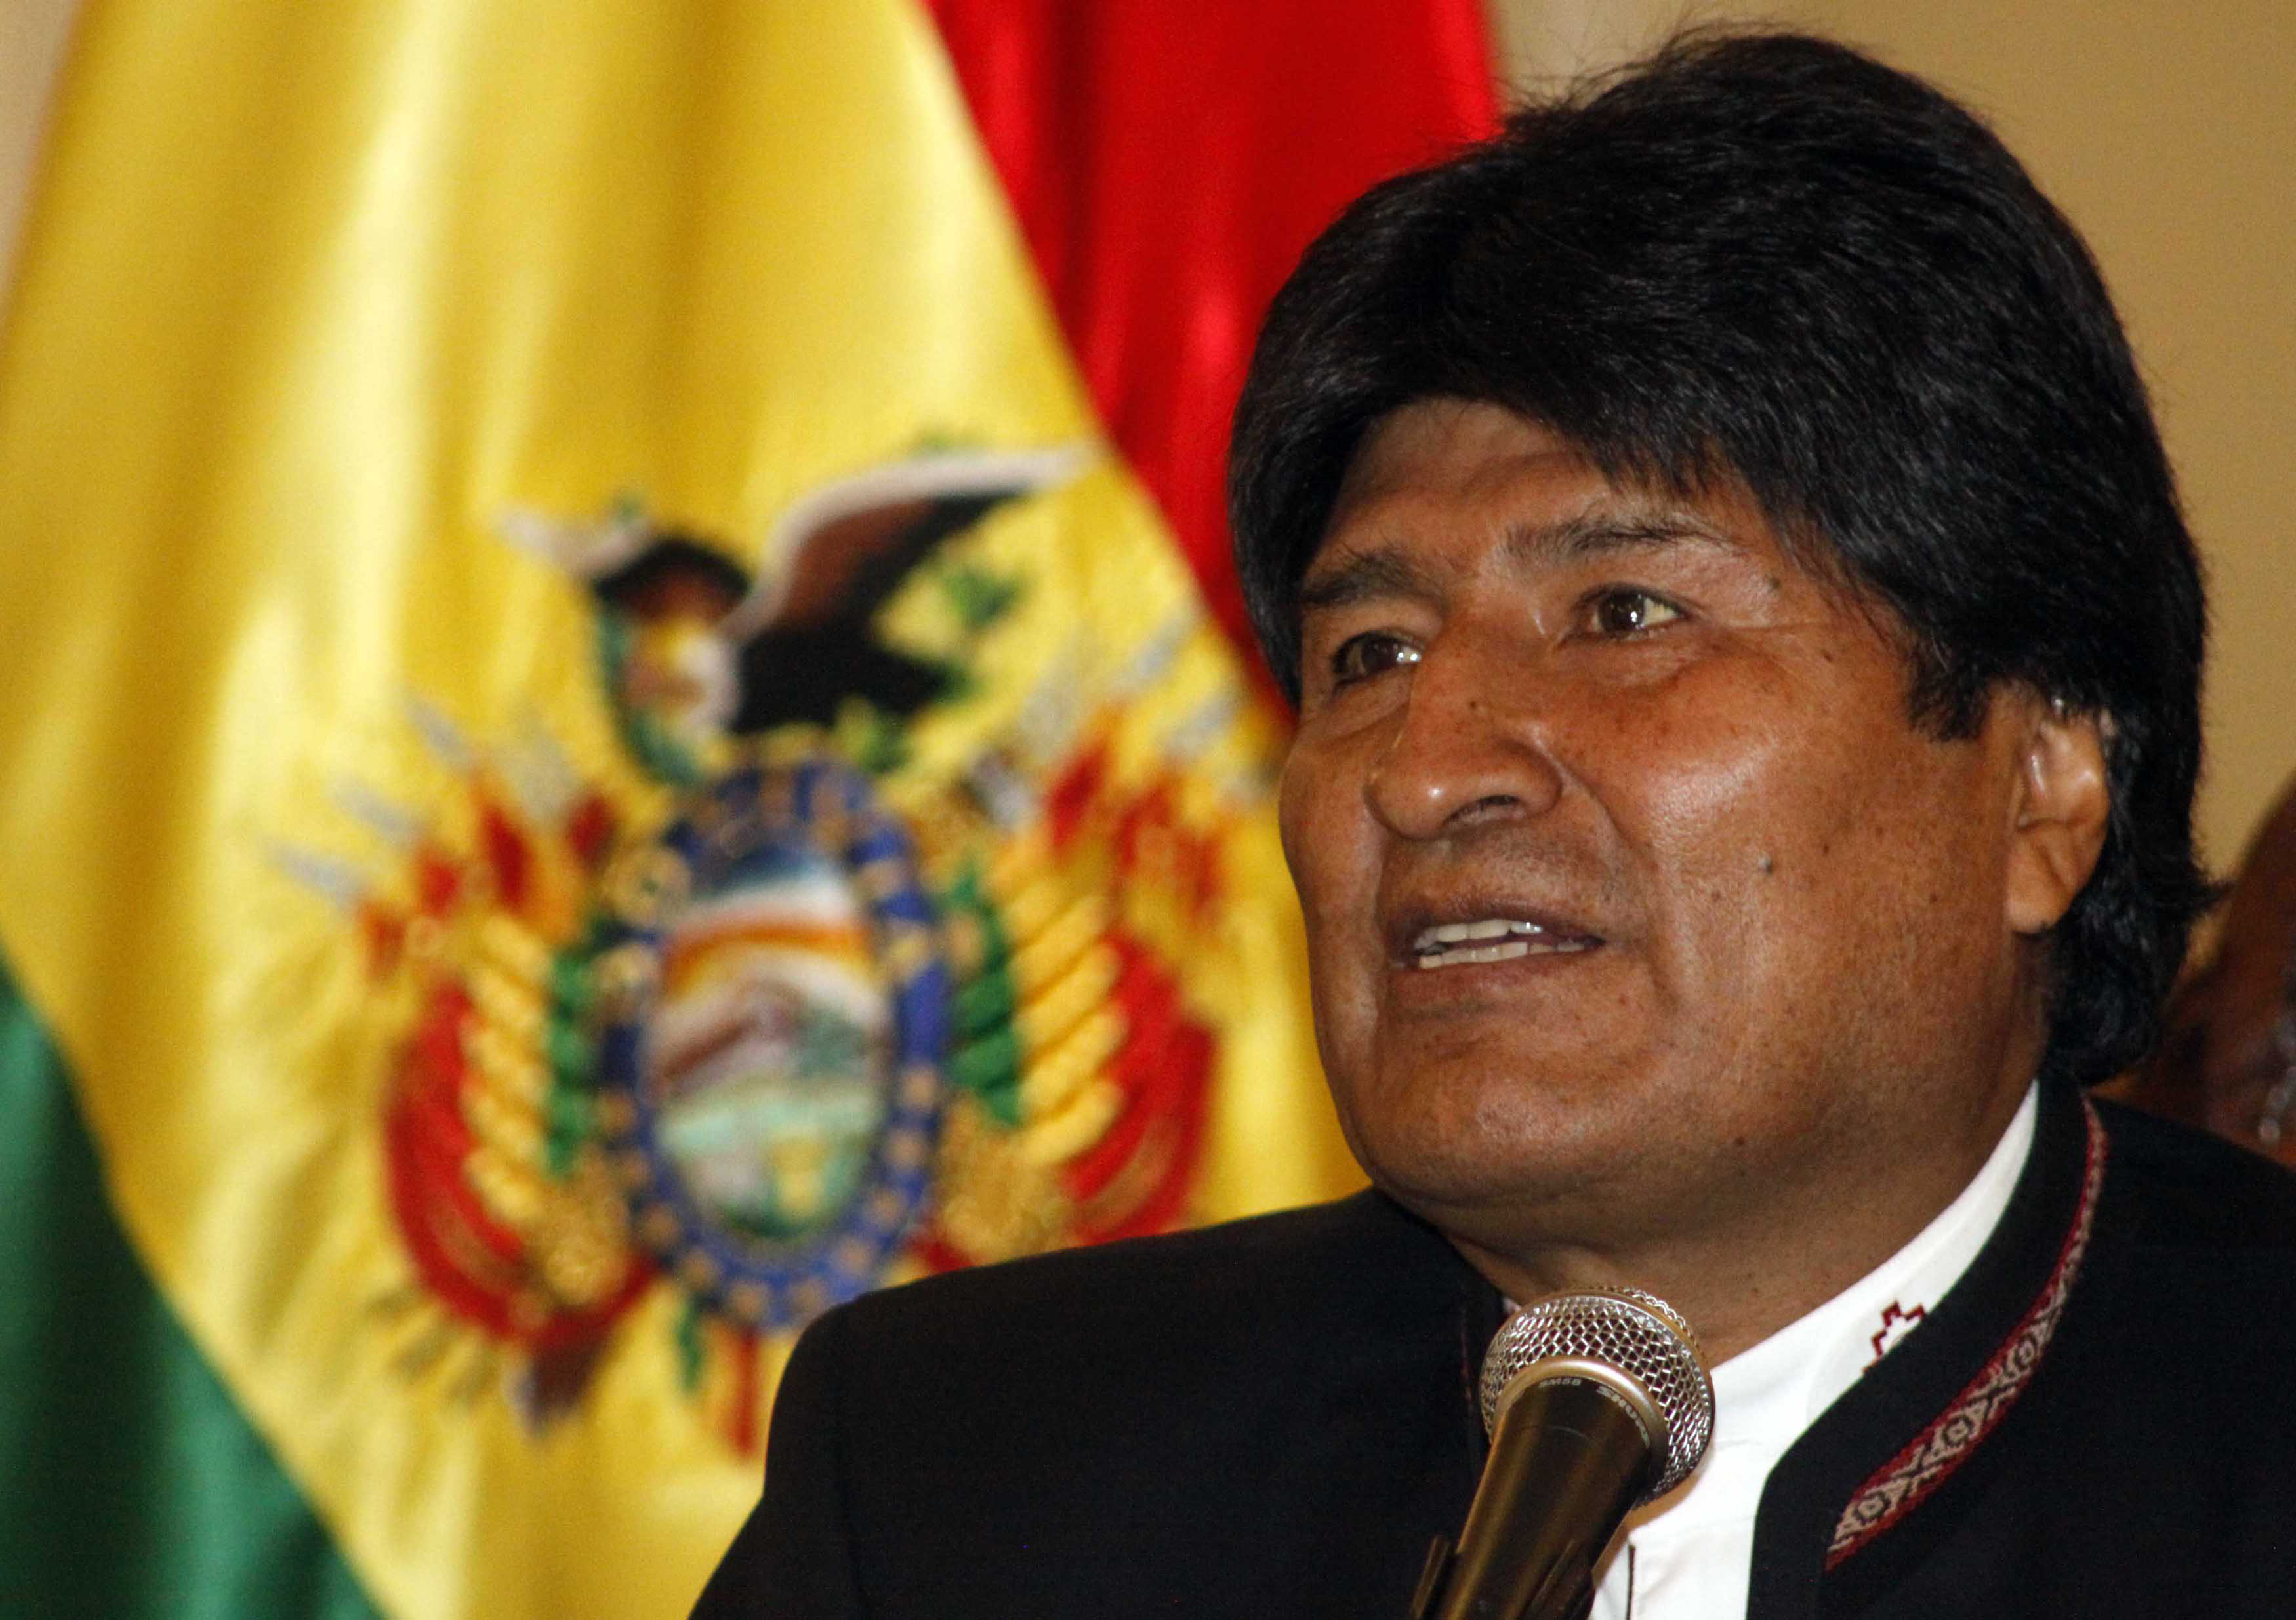 Bolivia's President Evo Morales speaks during a news conference at the presidential palace in La Paz April 3, 2014. Morales expressed his solidarity with the Chilean people following earthquakes in the northern region over the past few days. REUTERS/ABI/Bolivian Presidency/Handout via Reuters (BOLIVIA - Tags: POLITICS HEADSHOT) ATTENTION EDITORS - THIS PICTURE WAS PROVIDED BY A THIRD PARTY. REUTERS IS UNABLE TO INDEPENDENTLY VERIFY THE AUTHENTICITY, CONTENT, LOCATION OR DATE OF THIS IMAGE. THIS PICTURE IS DISTRIBUTED EXACTLY AS RECEIVED BY REUTERS, AS A SERVICE TO CLIENTS. FOR EDITORIAL USE ONLY. NOT FOR SALE FOR MARKETING OR ADVERTISING CAMPAIGNS - RTR3JTG0